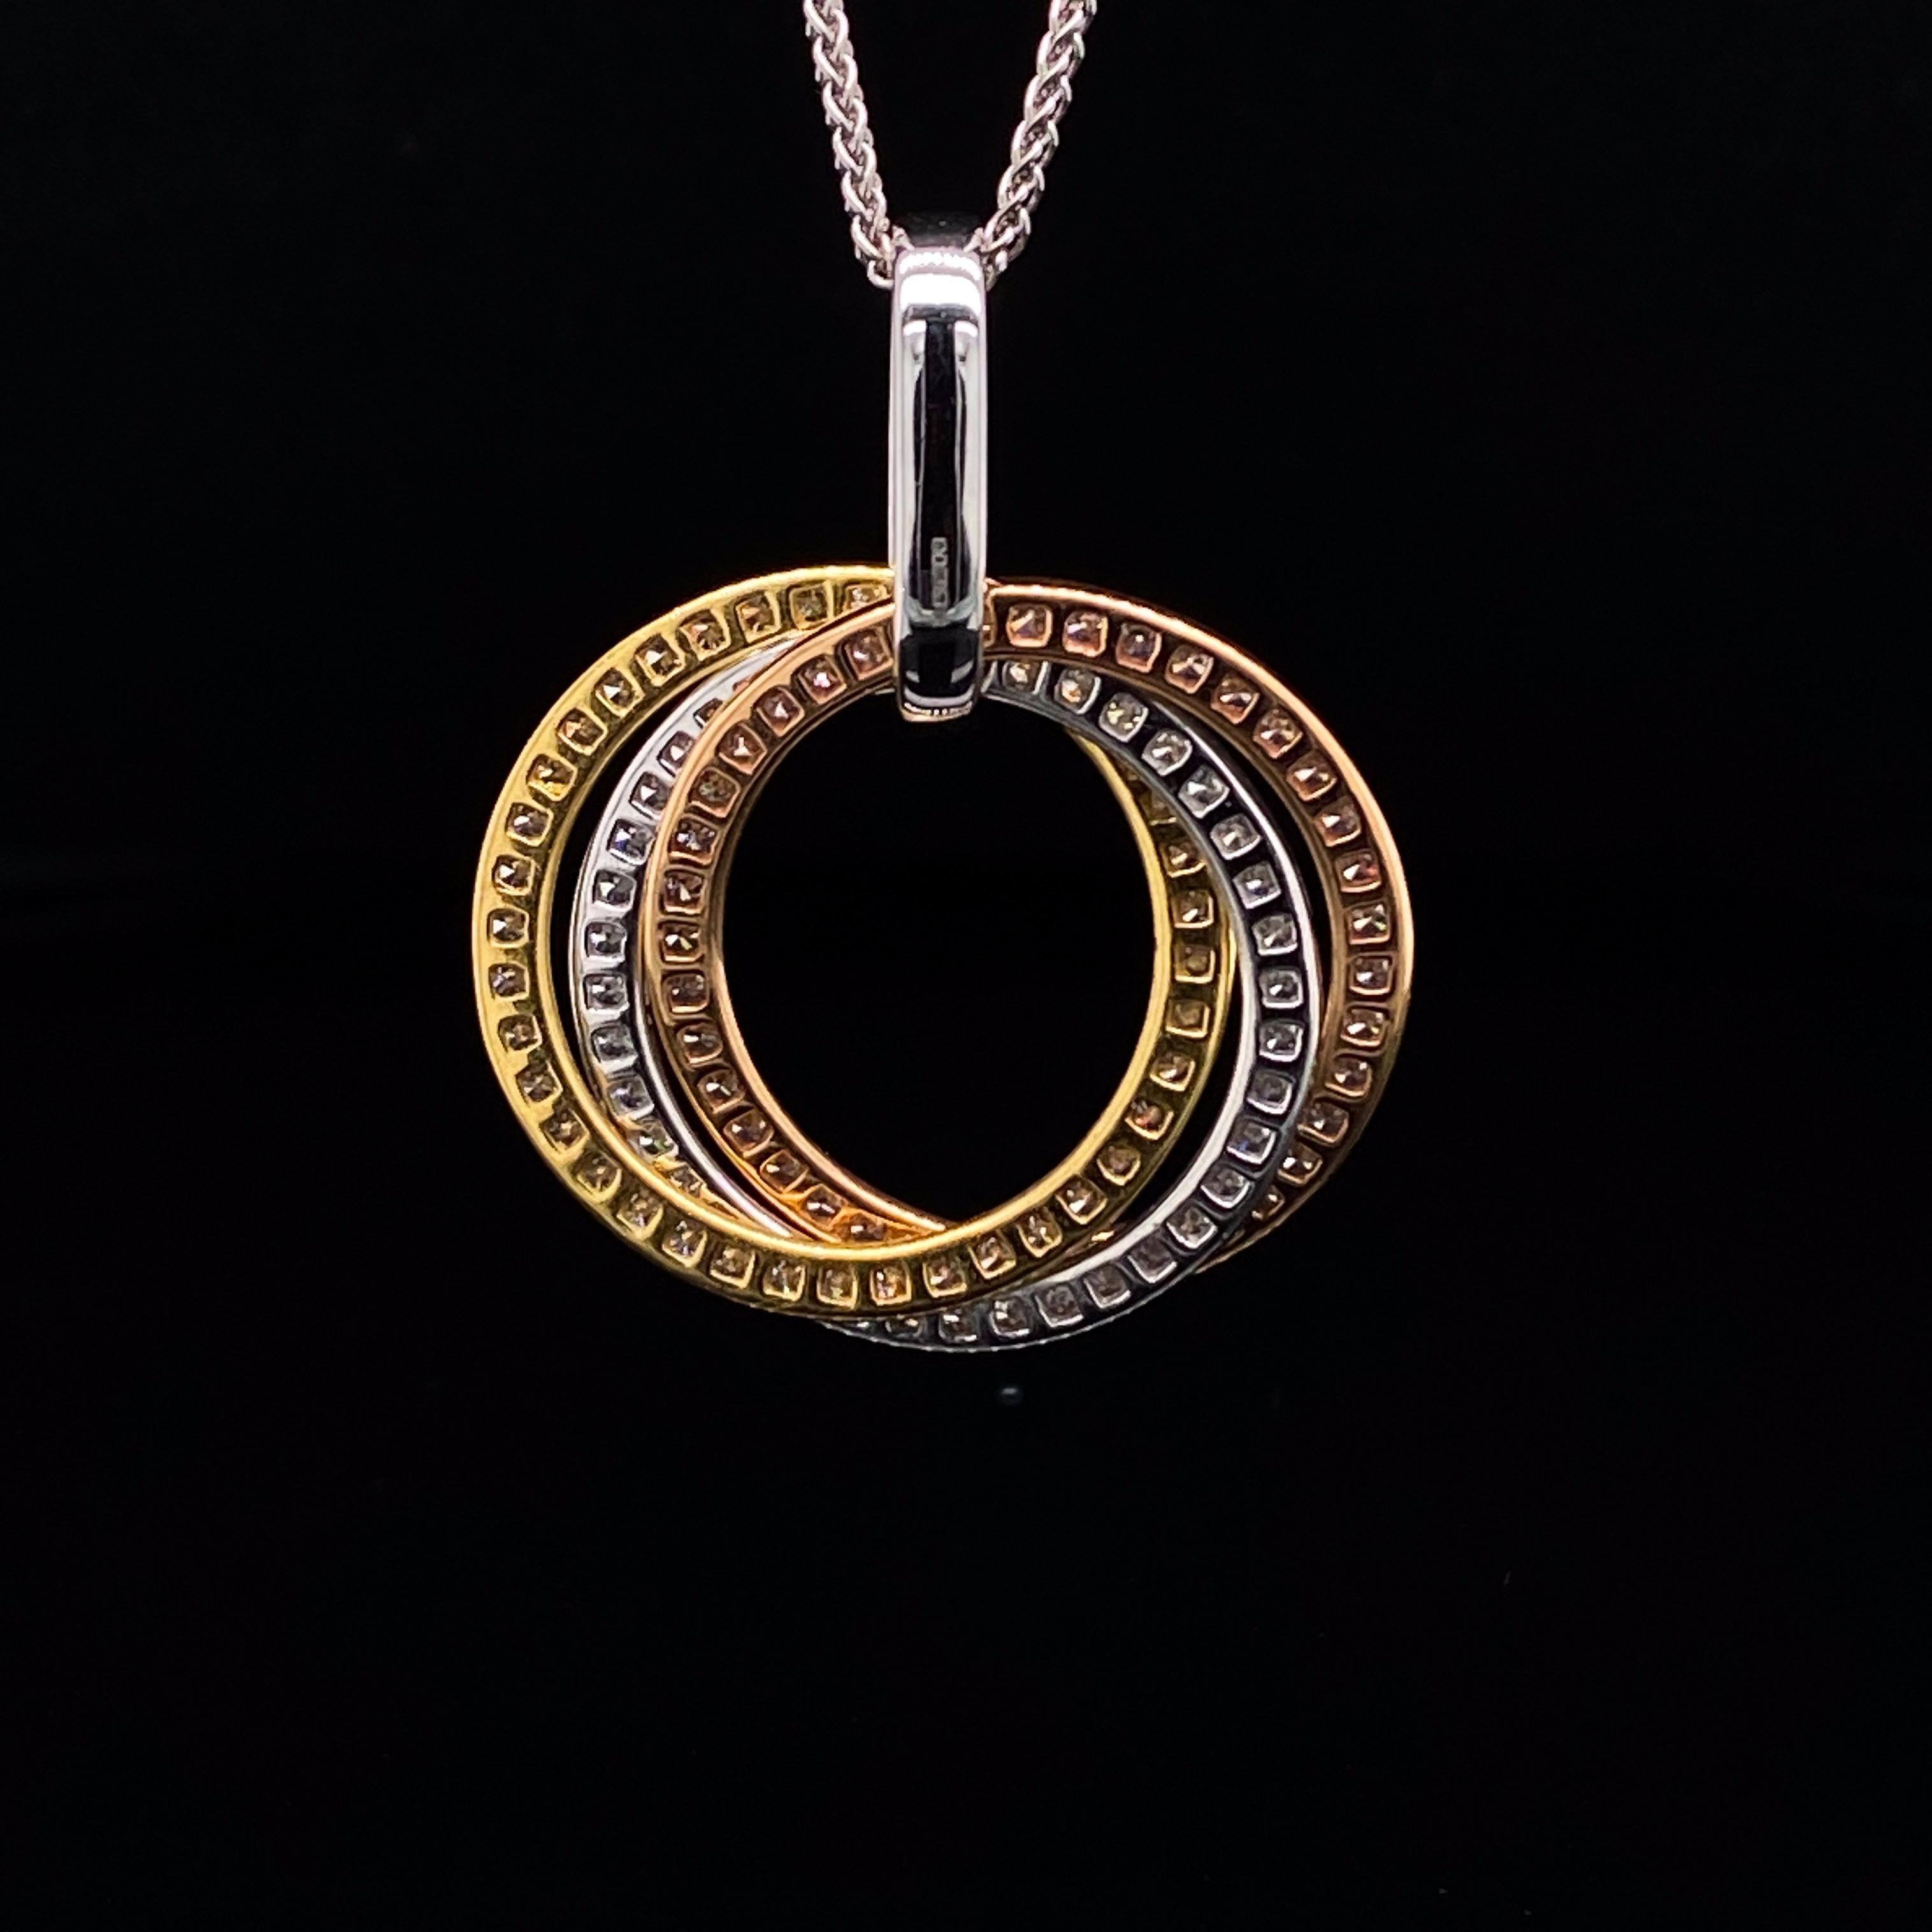 A diamond trinity pendant necklace 18 karat white gold.

Composed of three white gold loops interlocked into one classic pendant. The loops are each pave set with round brilliant cut diamonds making the pendant stand out and sparkle beautifully on